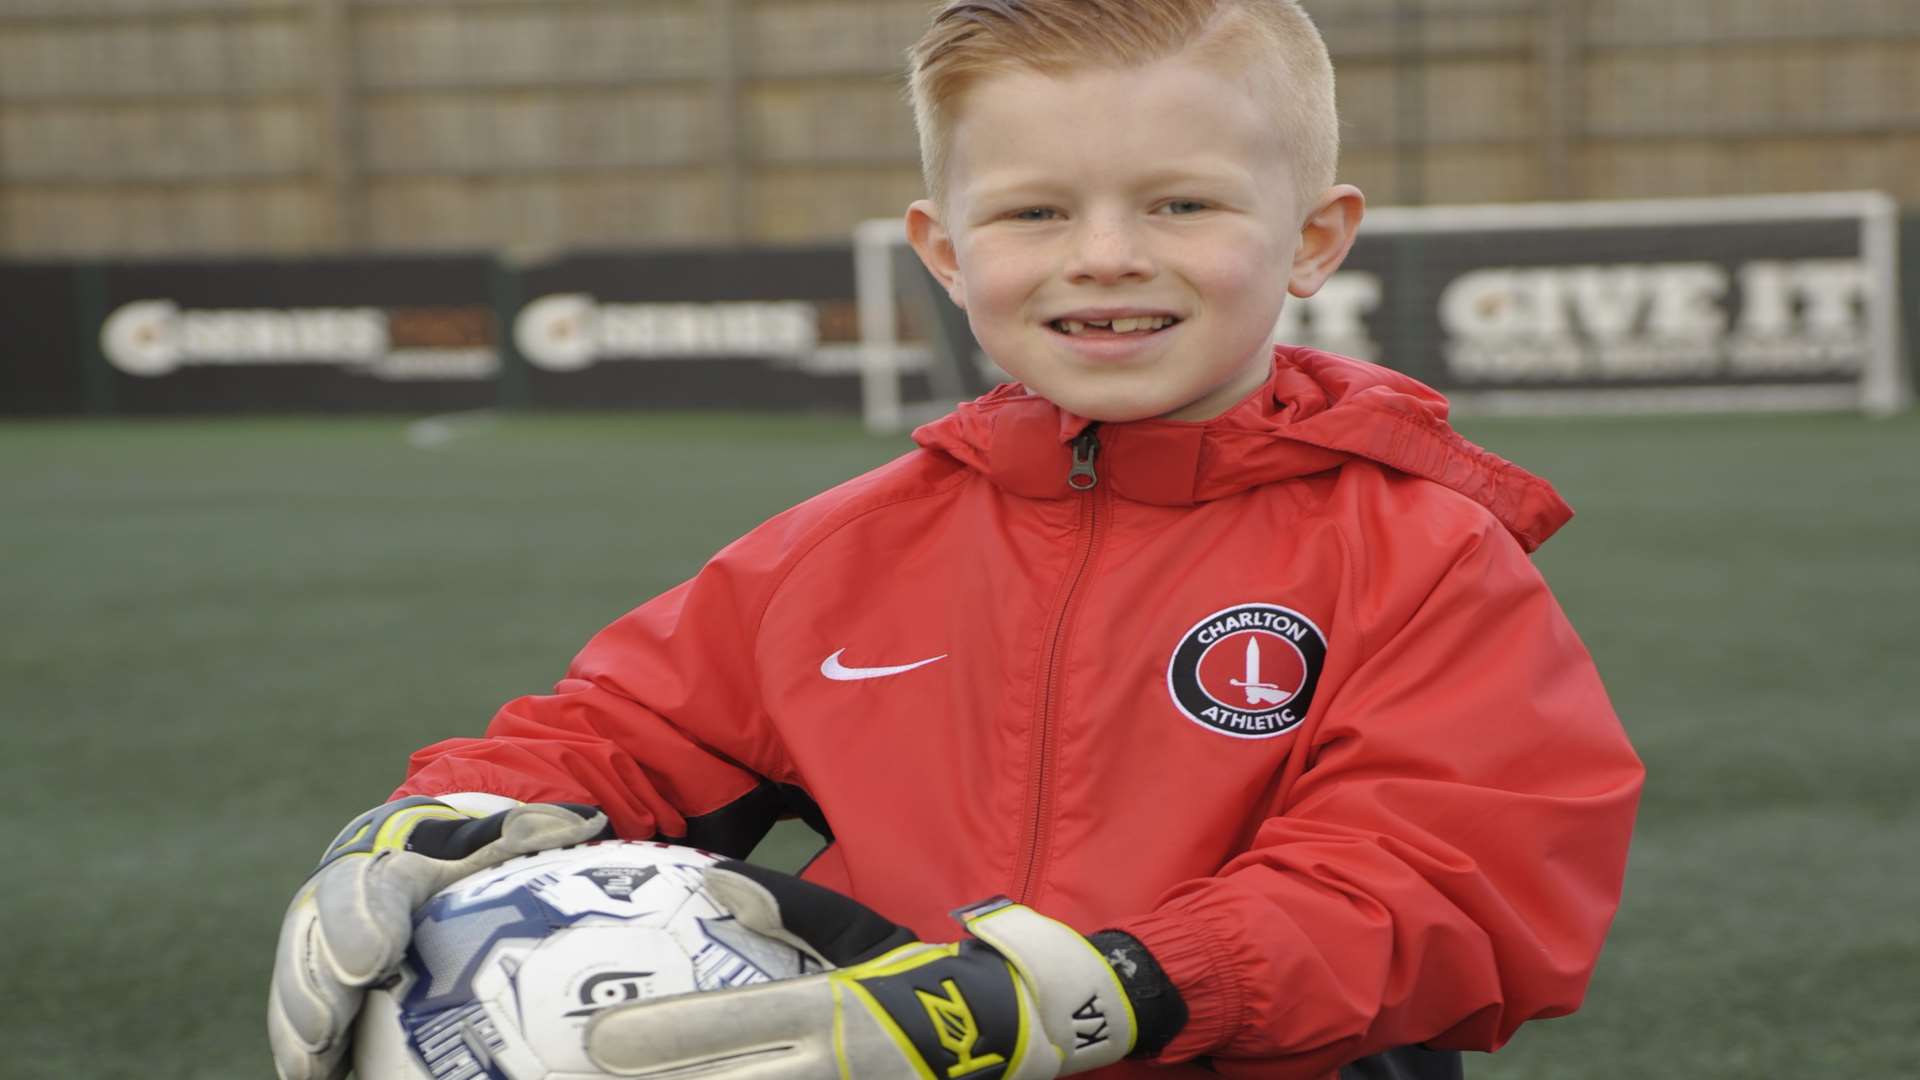 Kayden Abnet has been signed for under 9's at Charlton